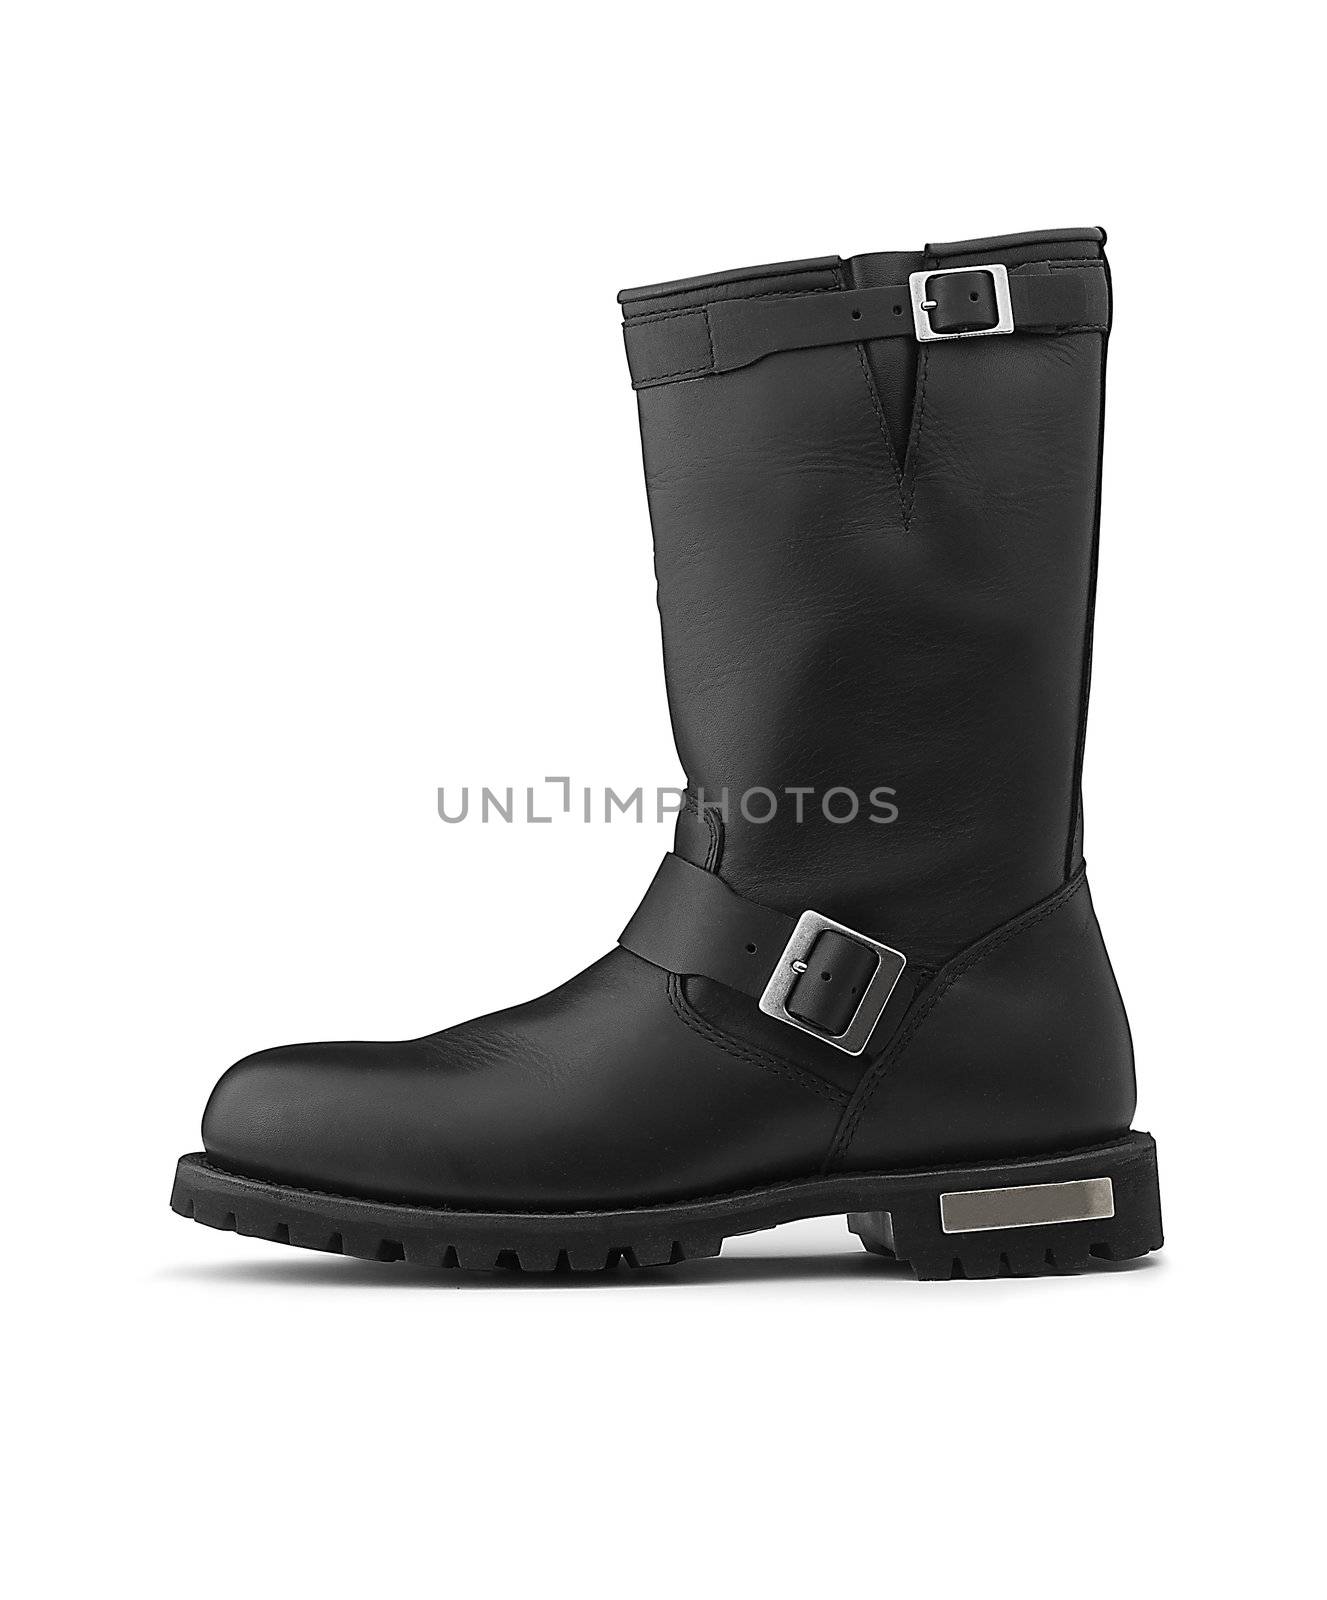 Black boots (clipping path) on white background